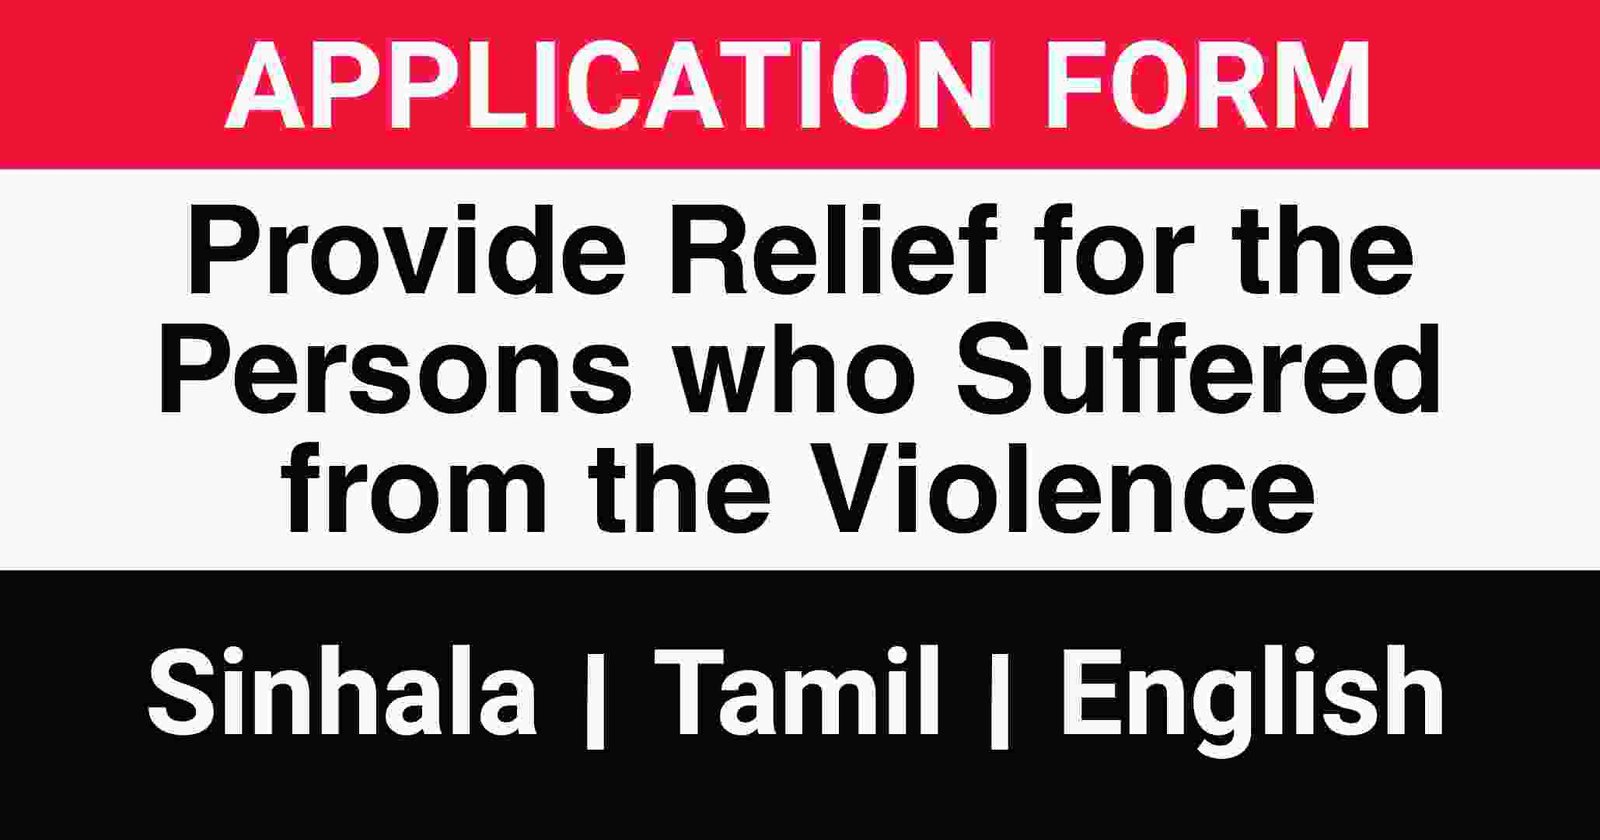 Provide Relief for the Persons who Suffered from the Violence